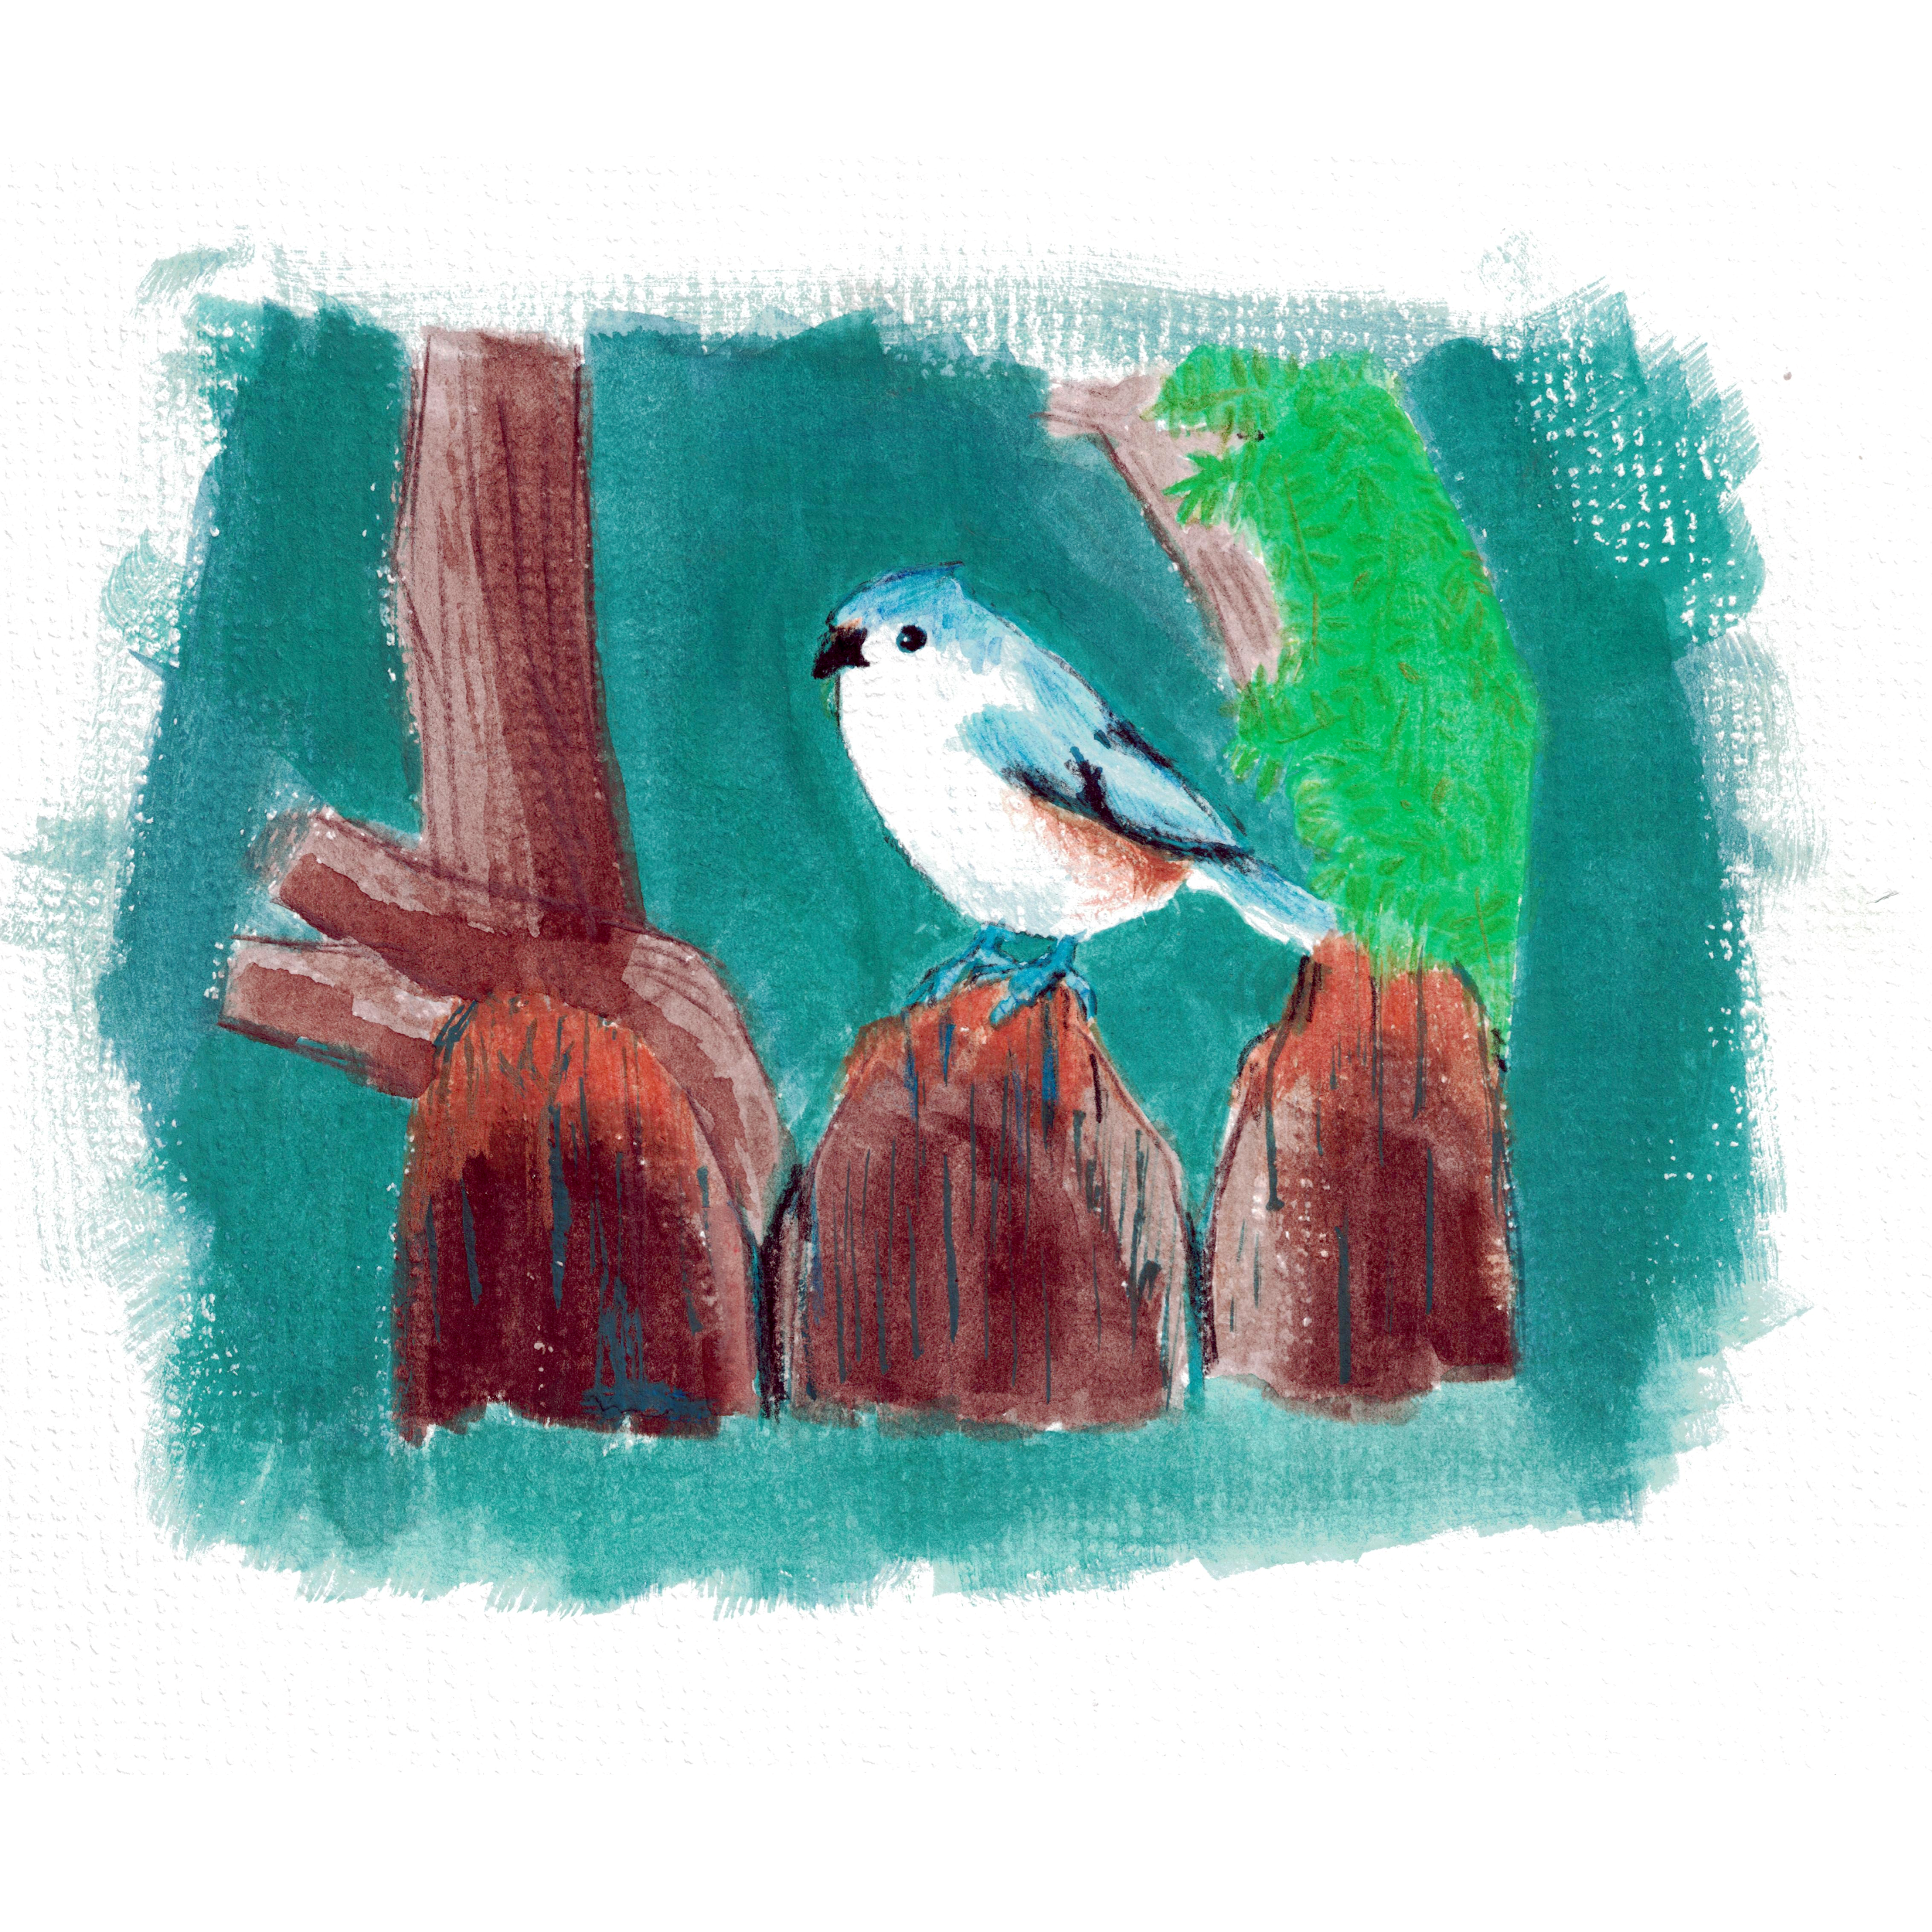 Drawing of a Tufted Titmouse on a fence